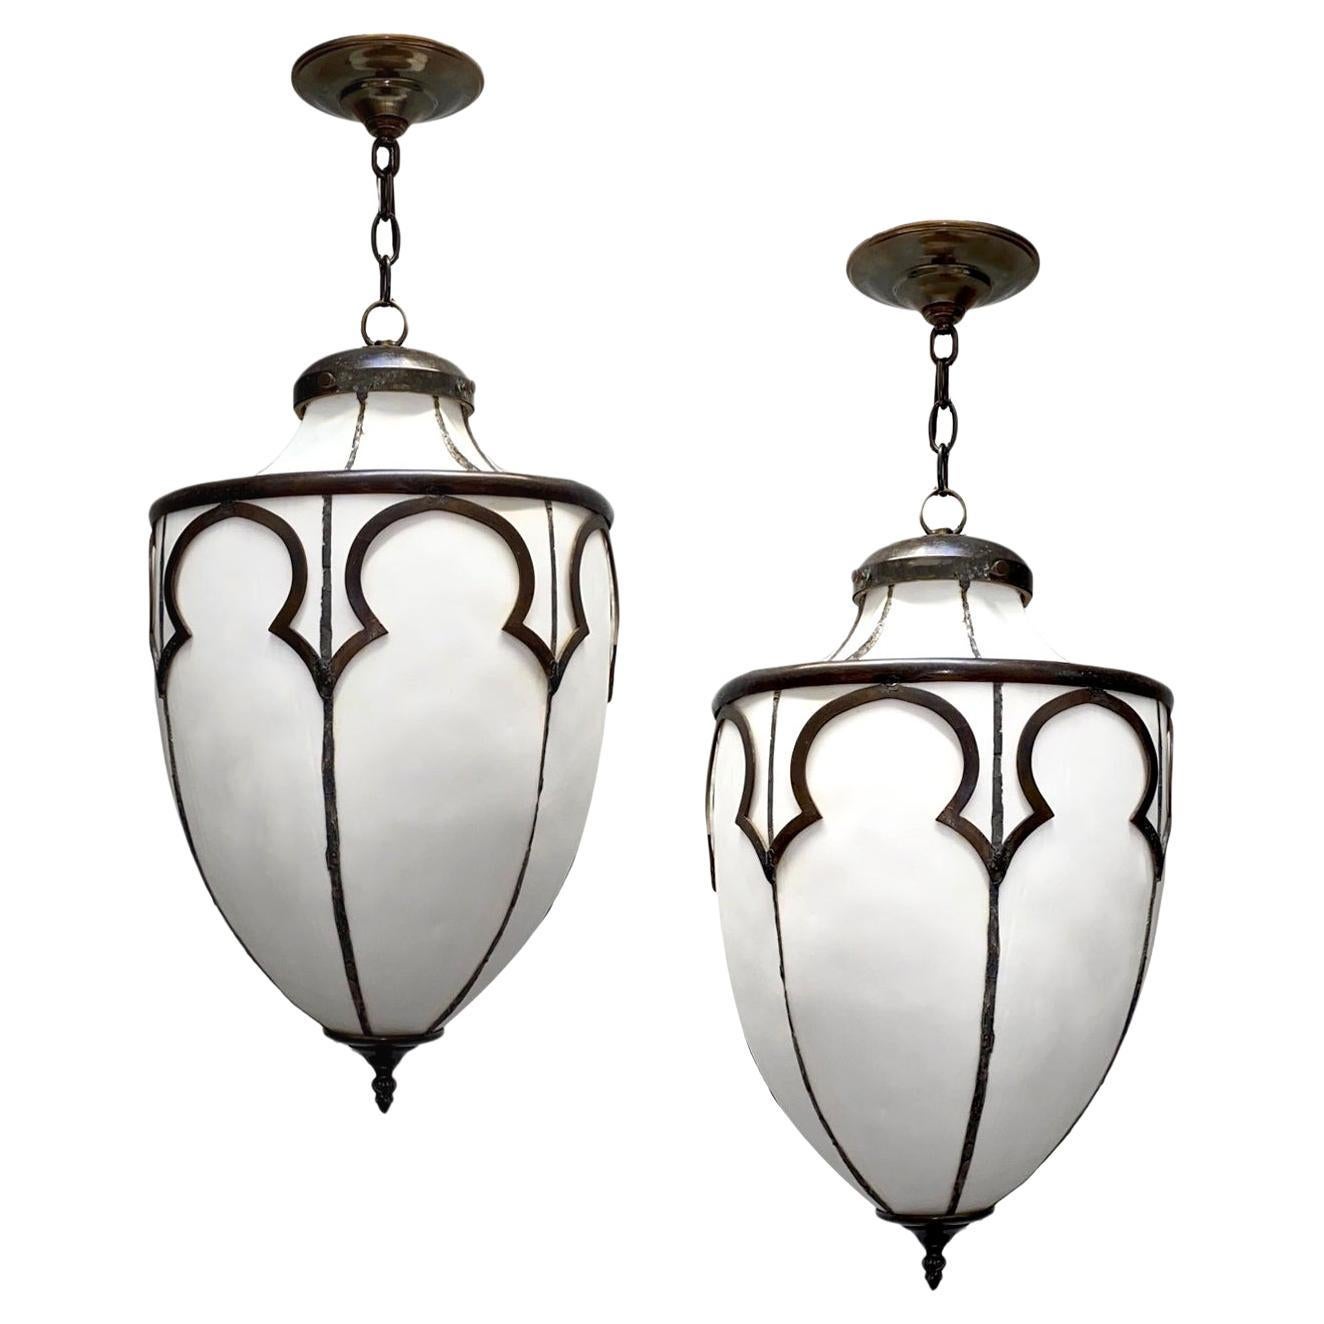 Pair of Leaded Glass Lanterns, Sold Individually